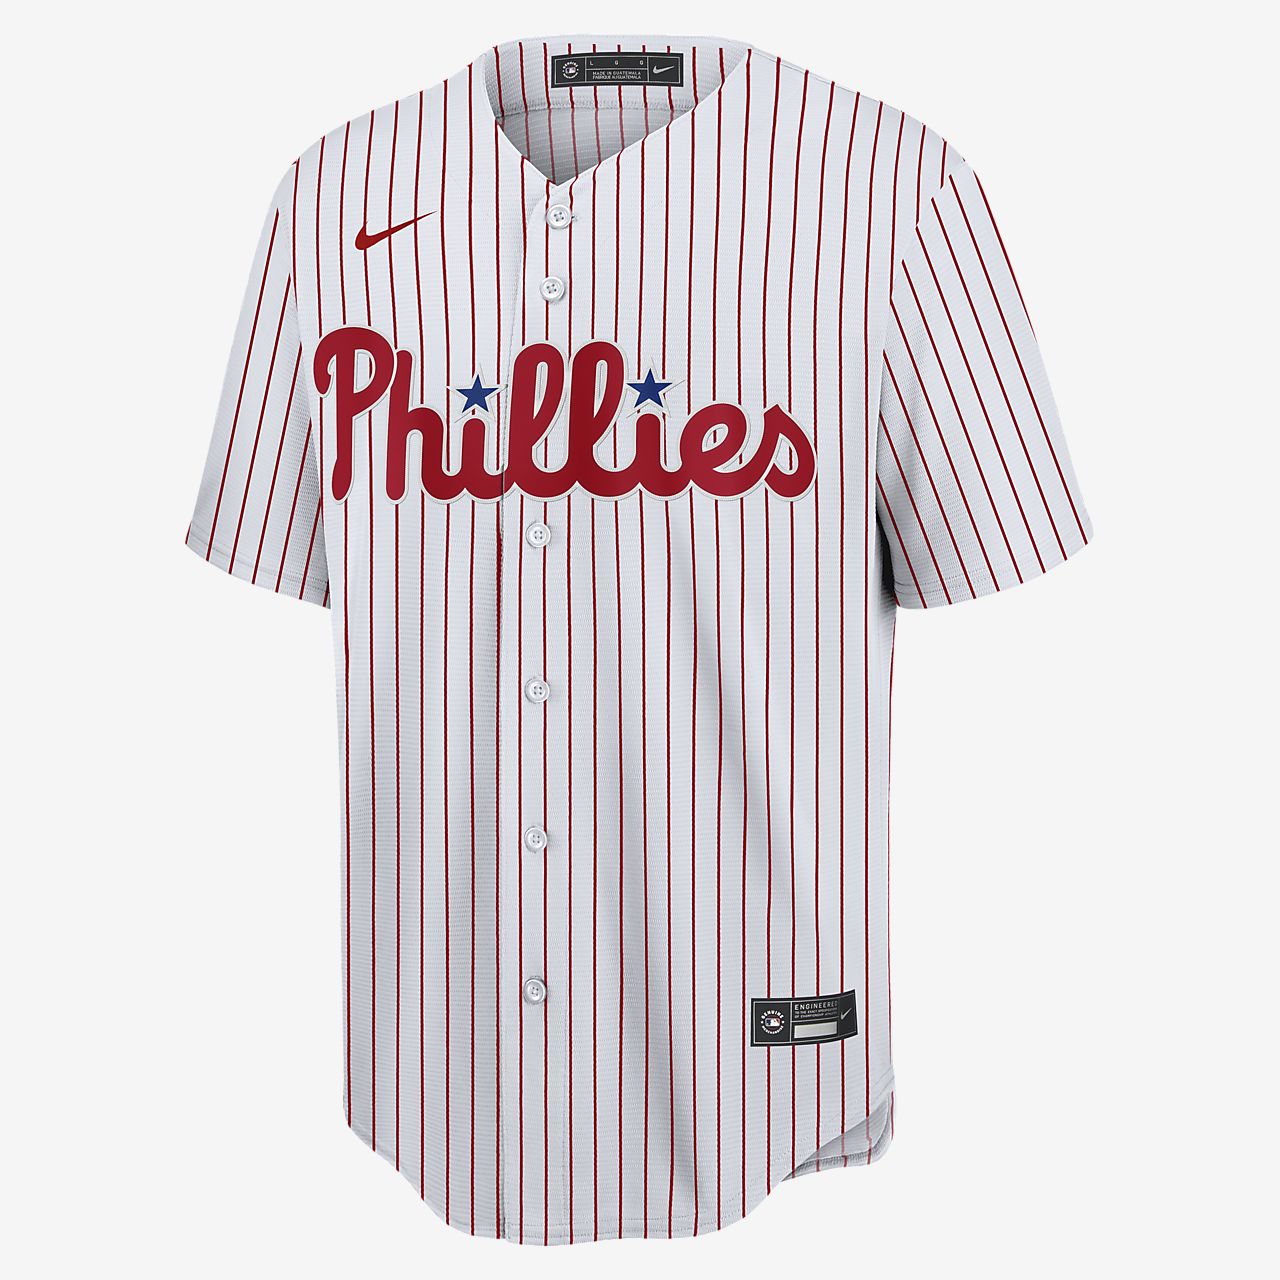 bryce harper phillies jersey youth